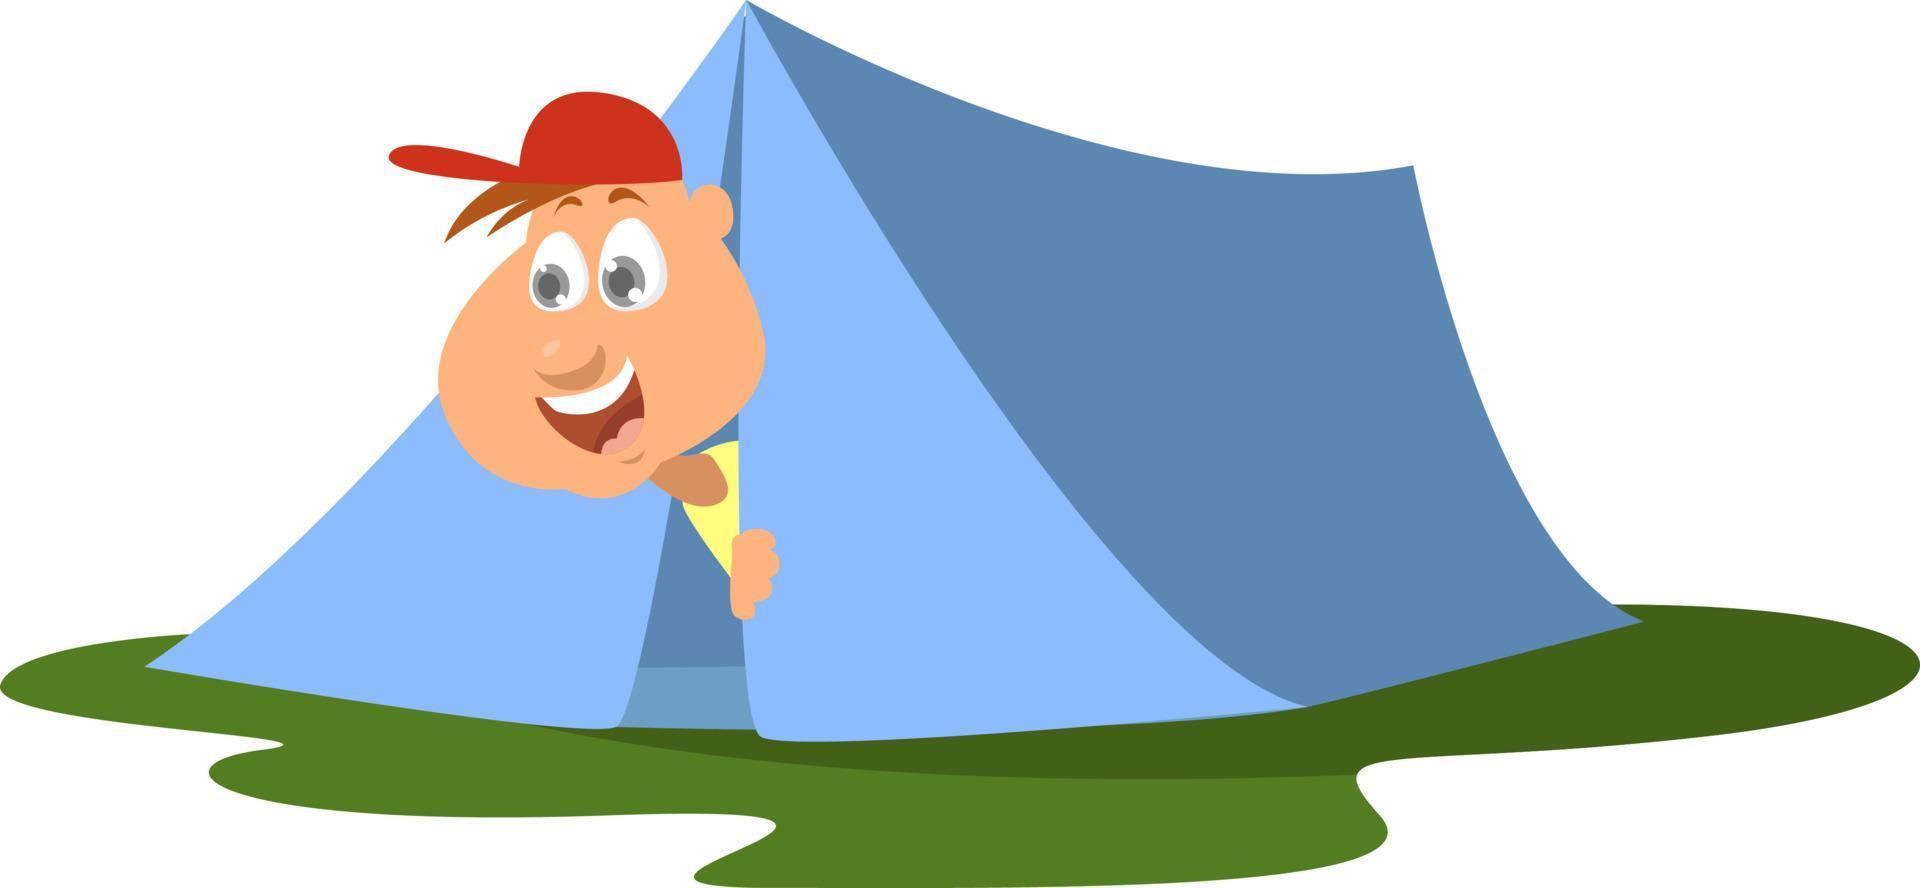 Camping trip, illustration, vector on white background.